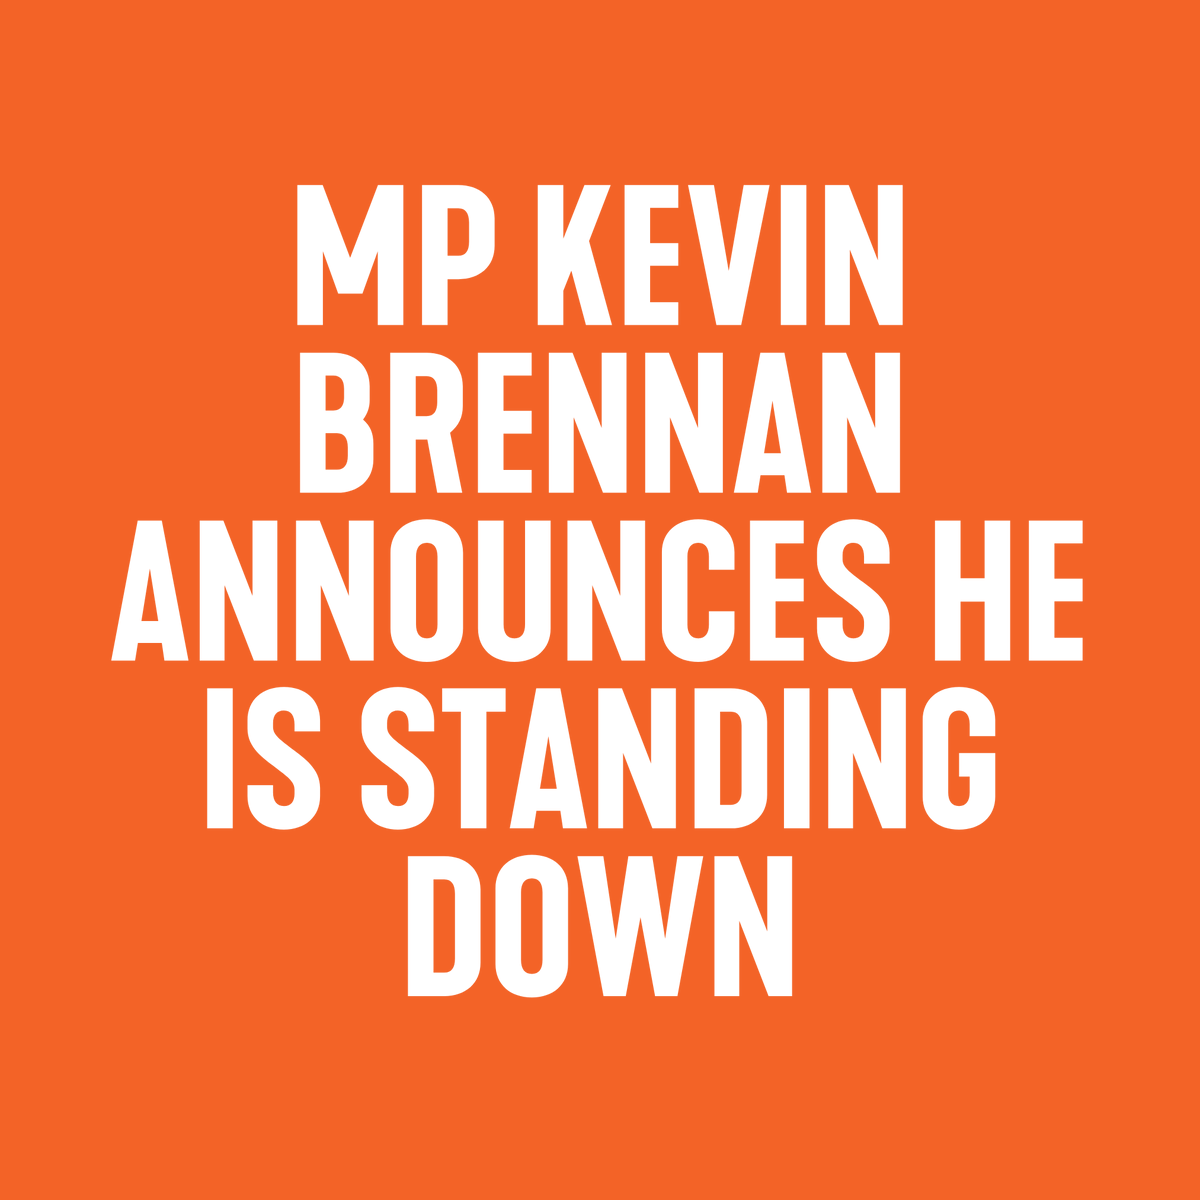 As serving as Member of Parliament for Cardiff West since 2001, @KevinBrennanMP is stepping down.